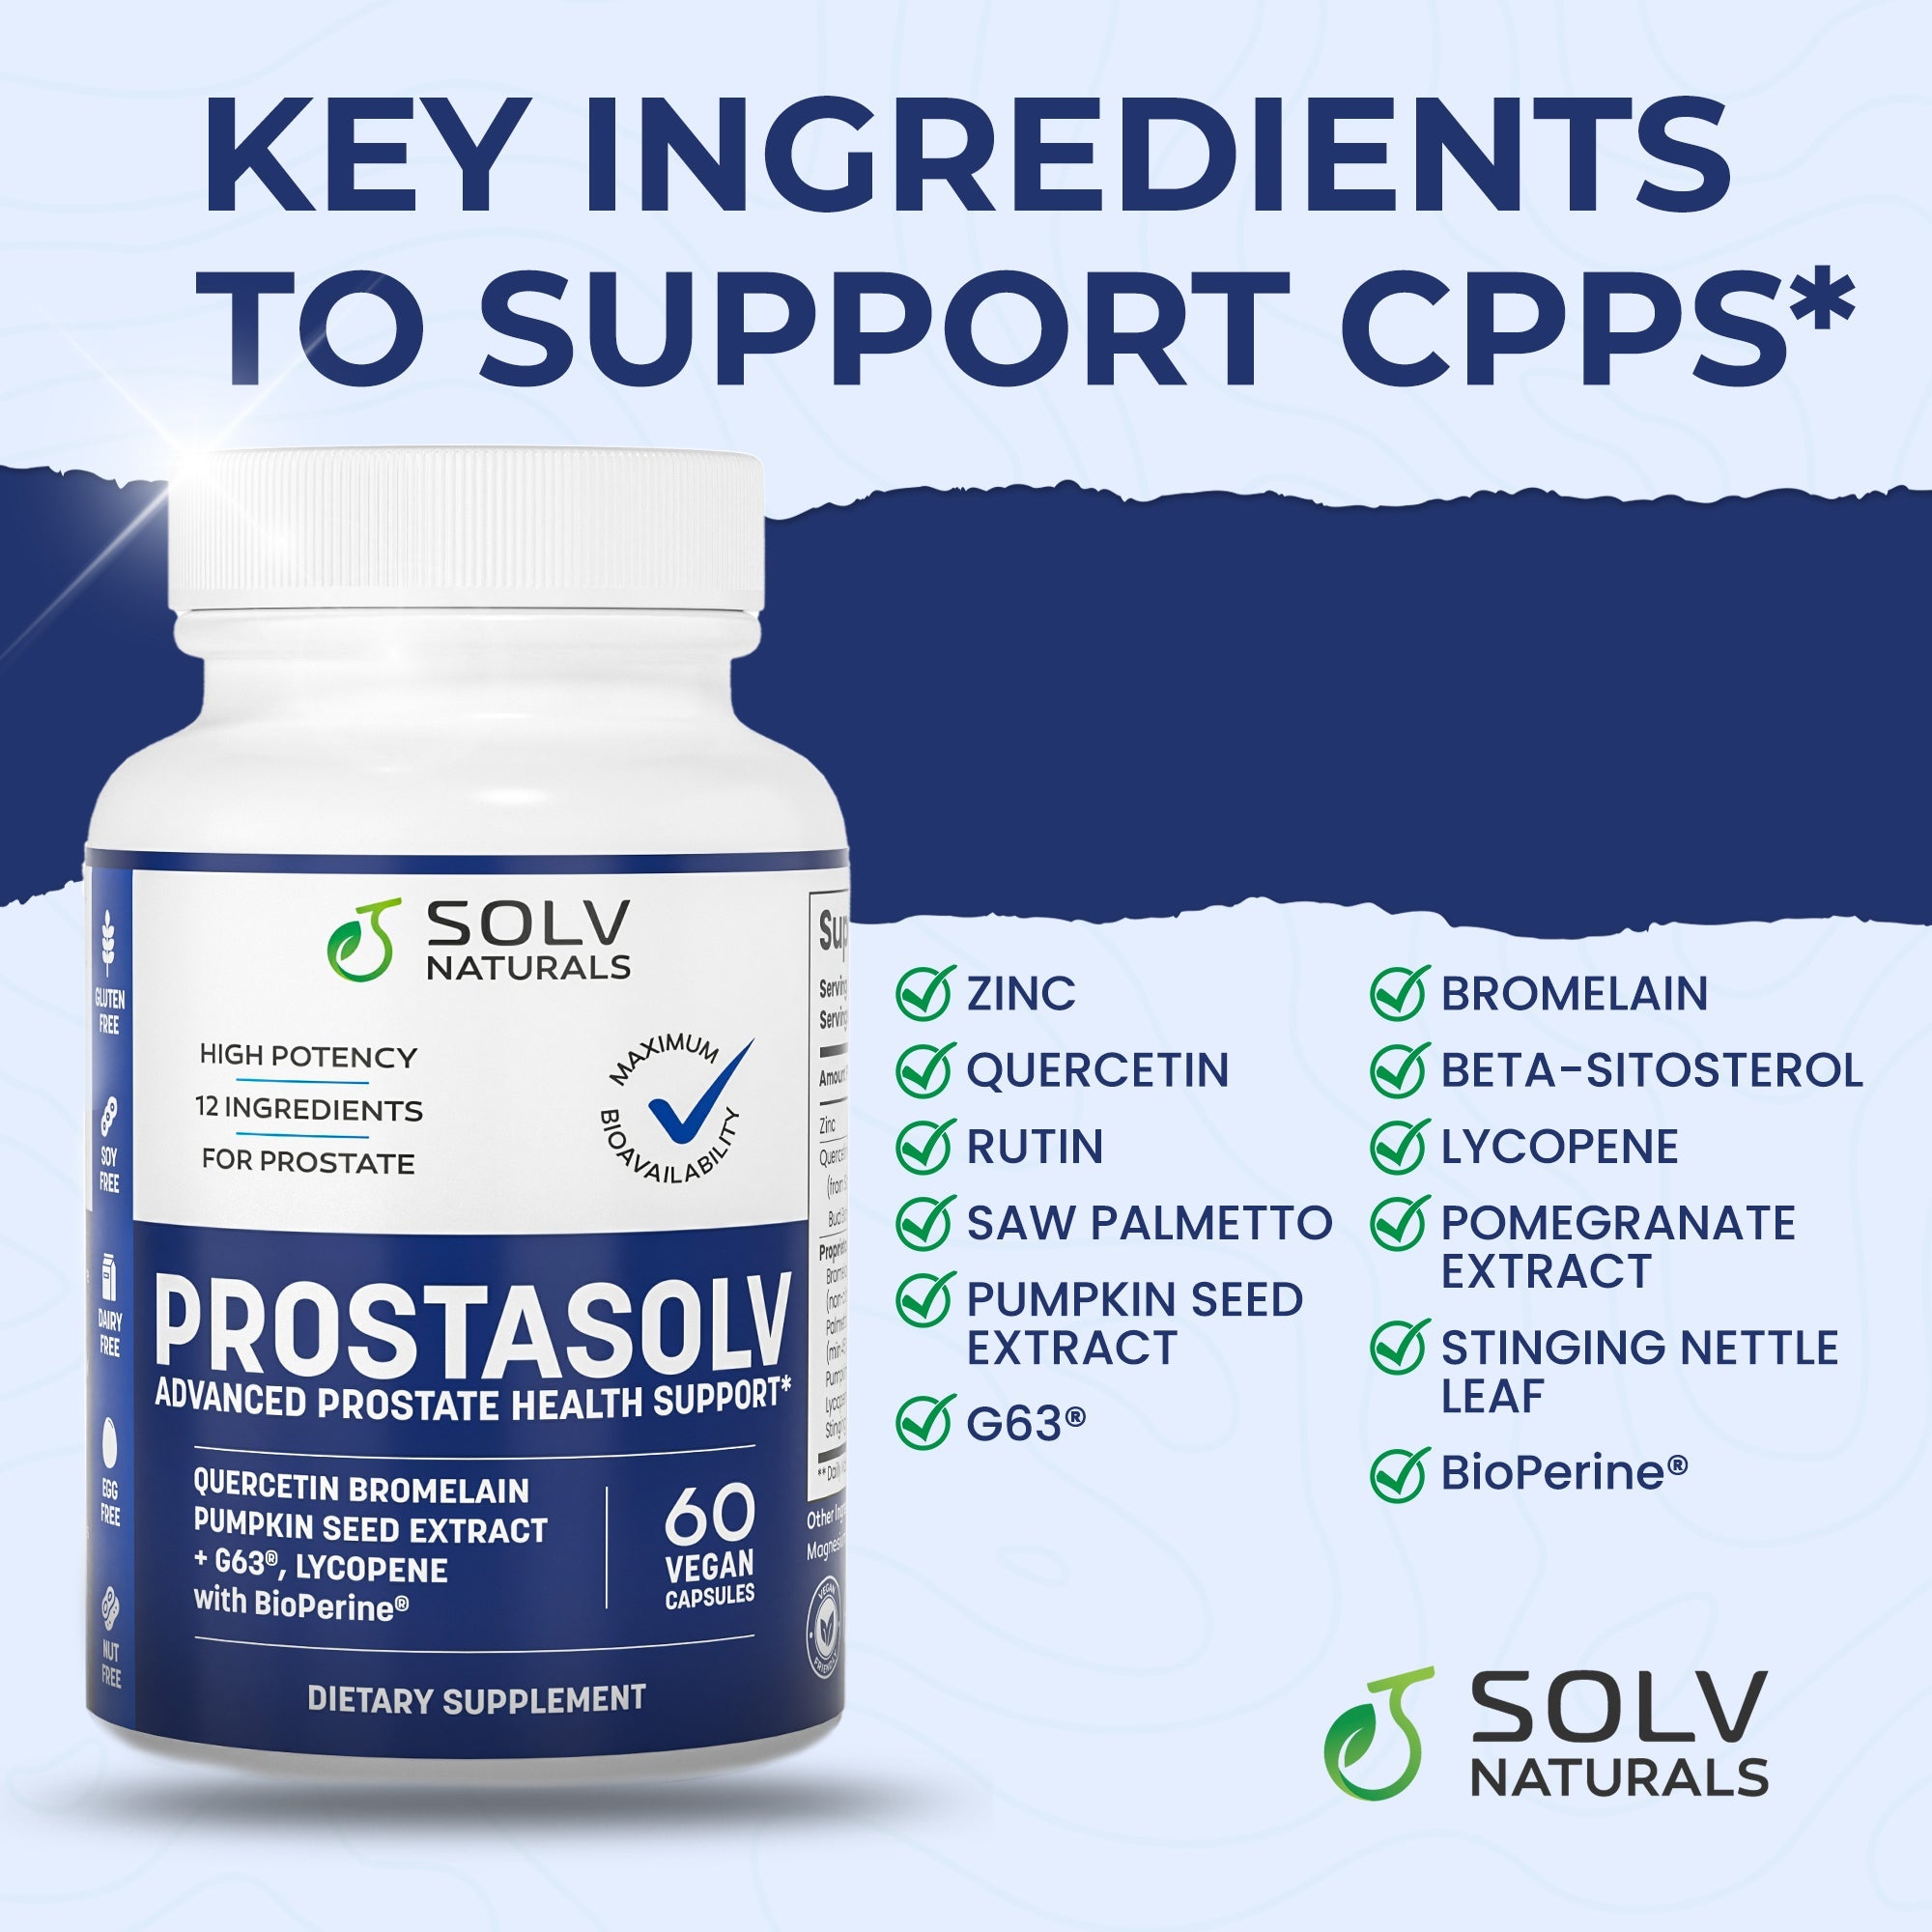 PROSTASOLV has all the key ingredients to help support CPPS*